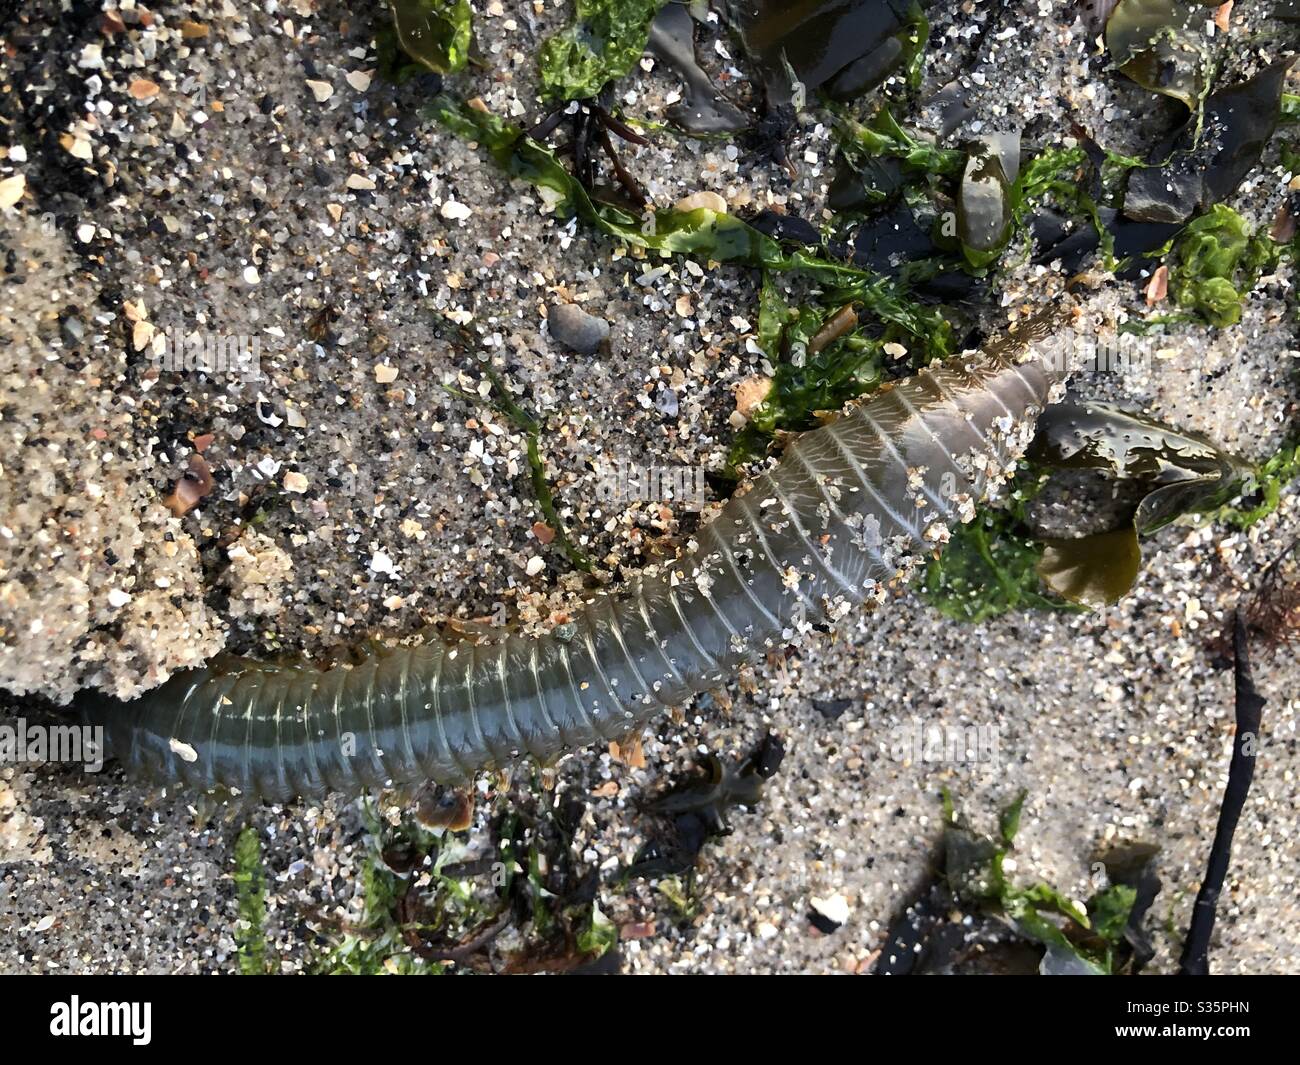 Sand worm emerging from the sand Stock Photo